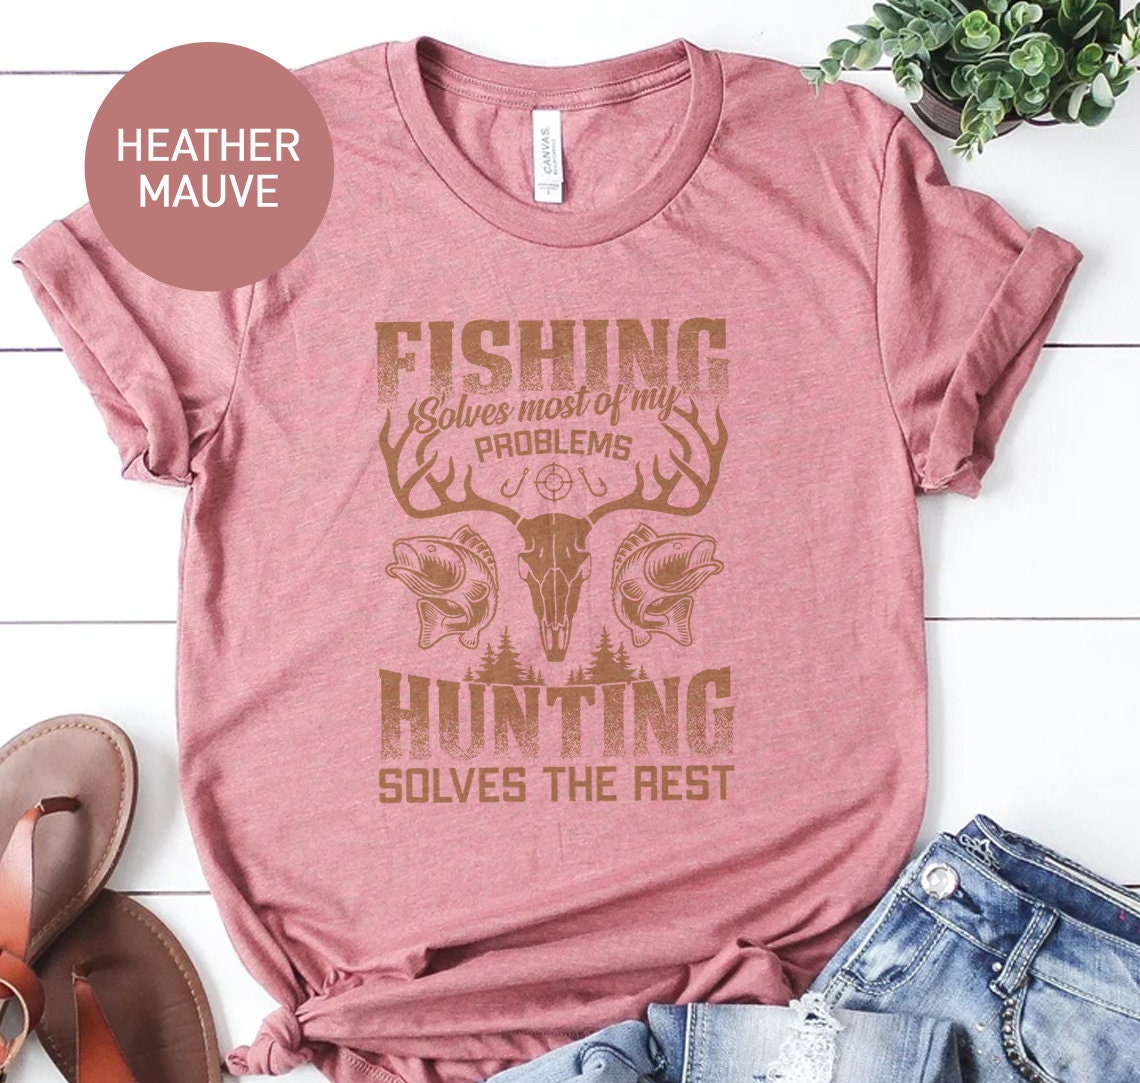 Fishing and Hunting Shirt for Men, Funny Fishing Tshirt for Fathers Day  Gift, Funny Mens Hunting Tshirt for Men, Fishing T-shirt for Husband 